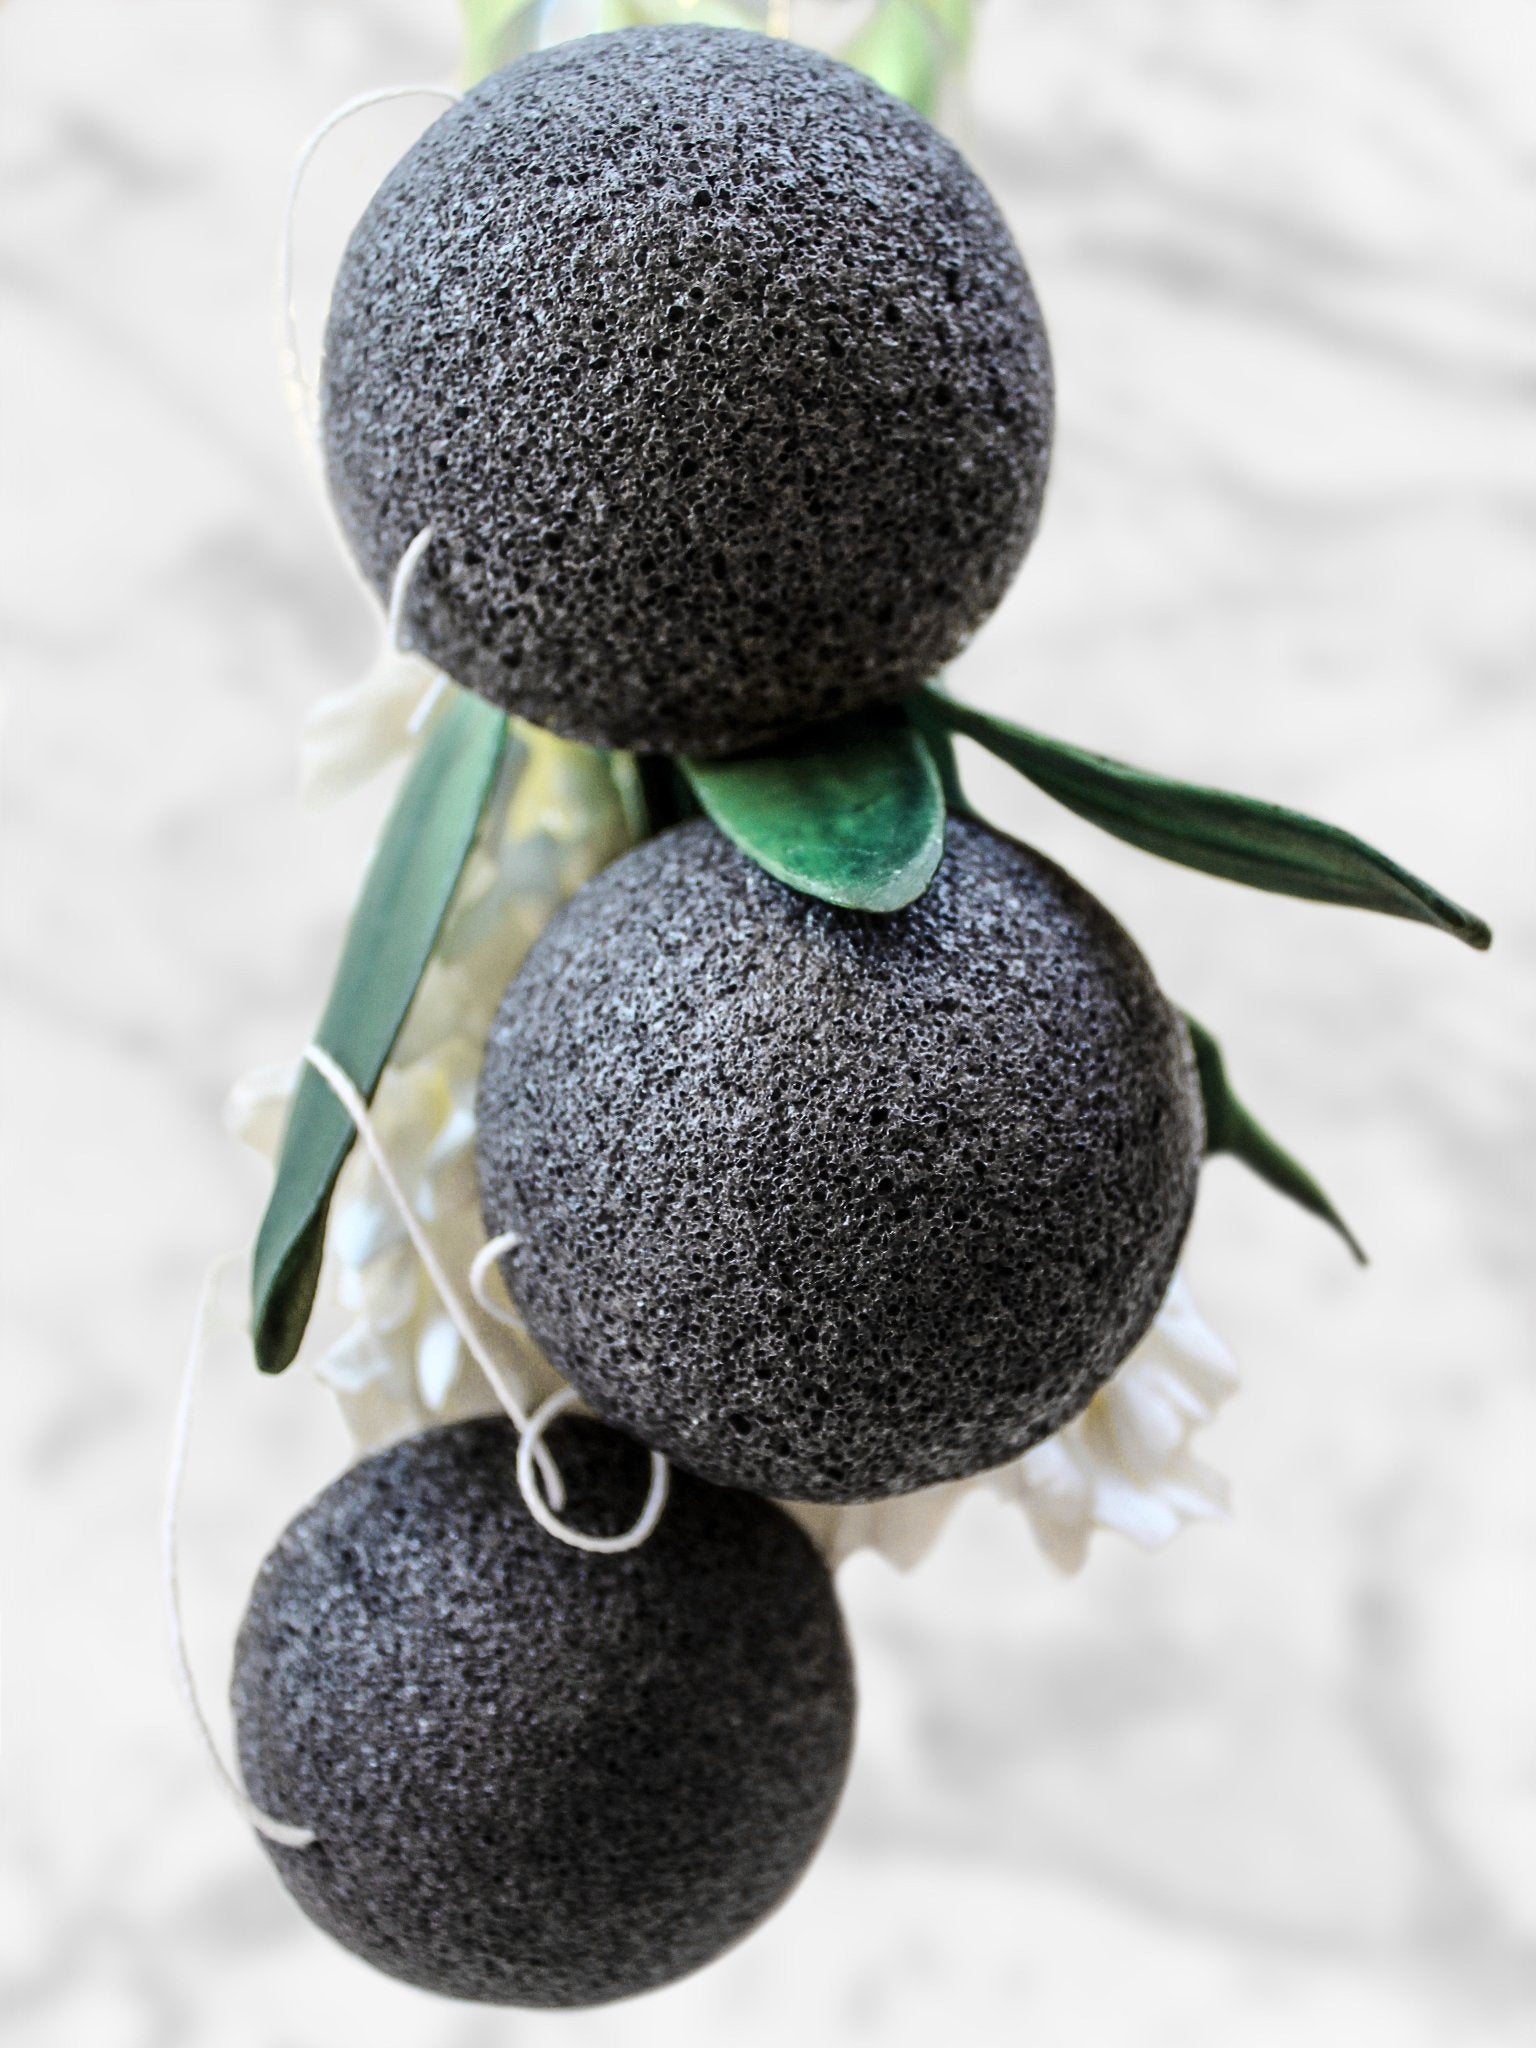 Biodegradable Konjac Sponge - Toxin-free Cleansing - Indagare Natural Beauty